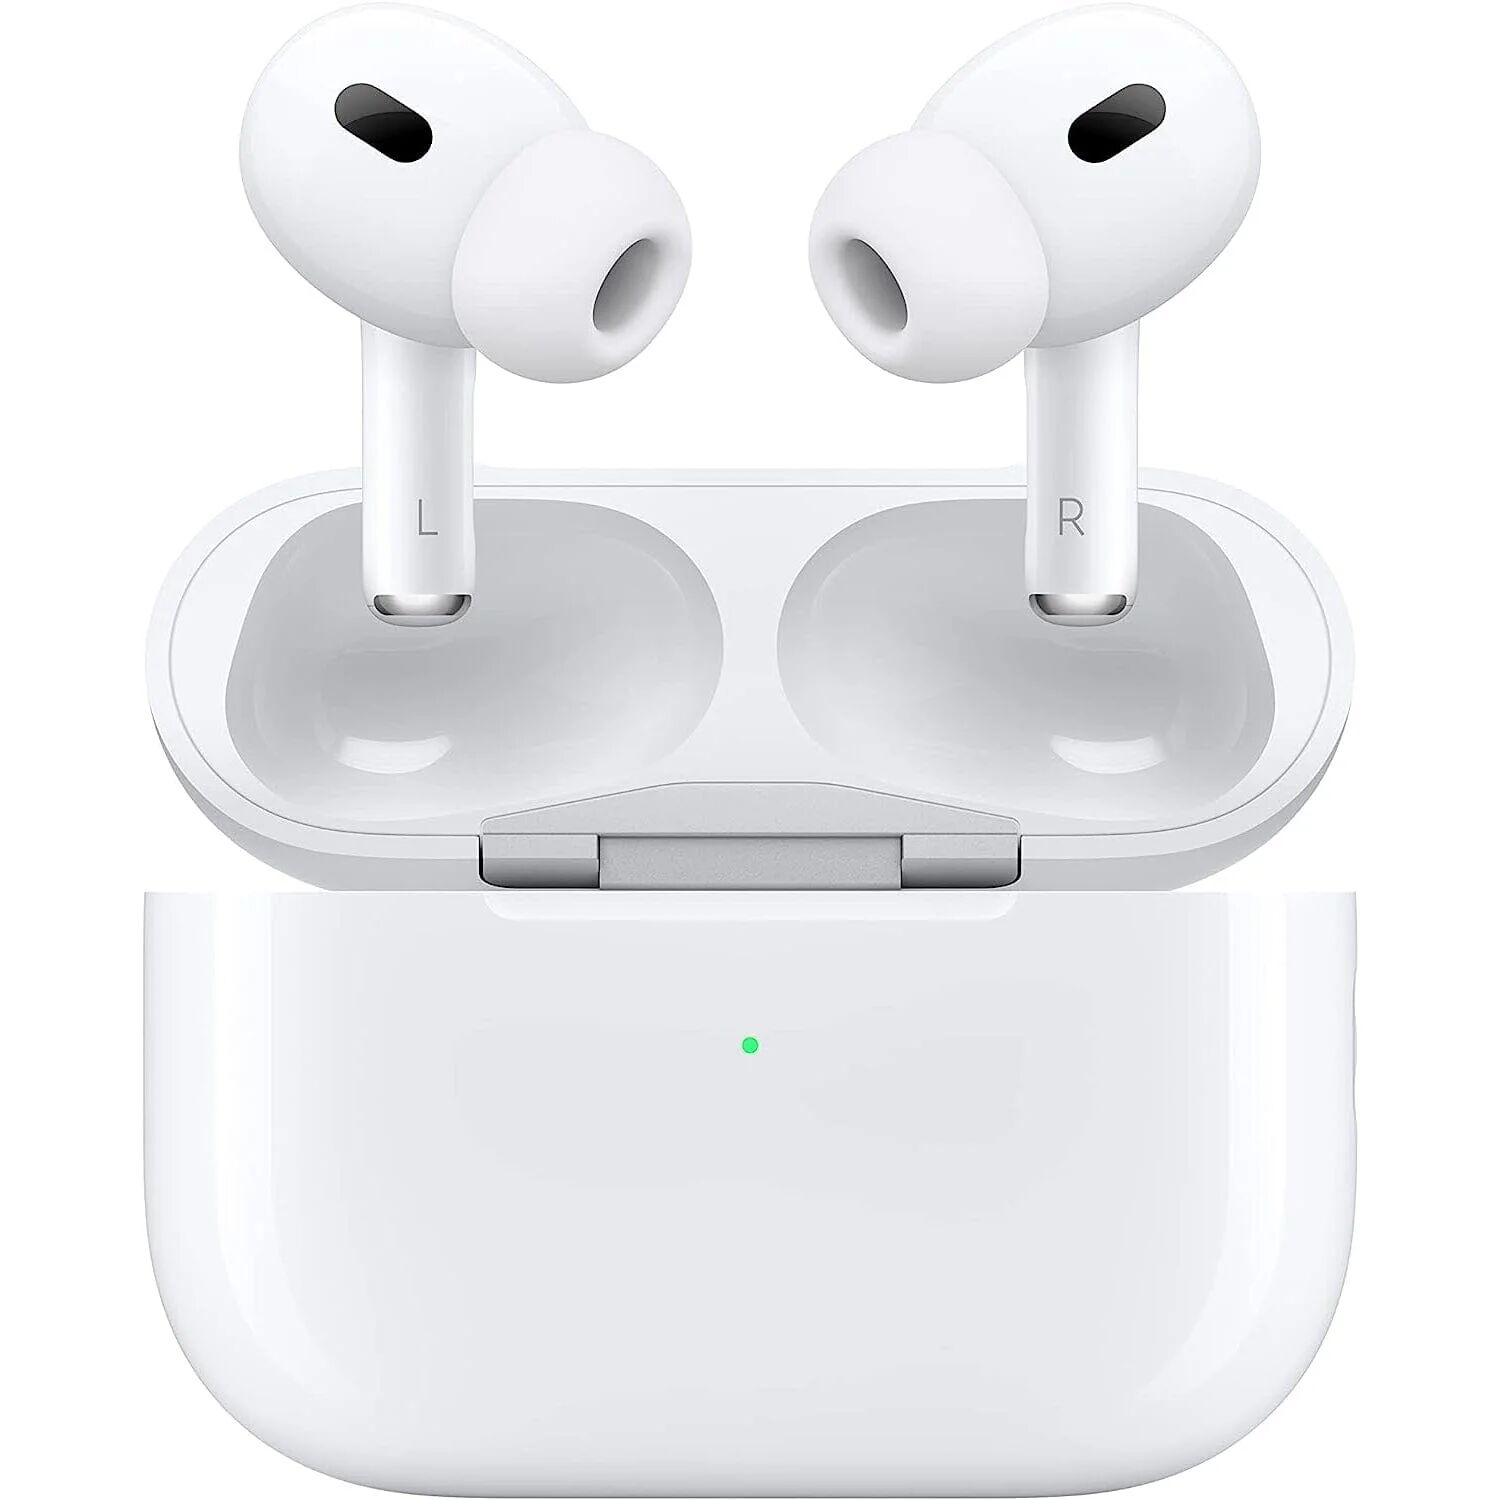 DailySale Apple AirPods Pro (2nd Generation) Wireless Ear Buds with MagSafe Charging Case (Refurbished)